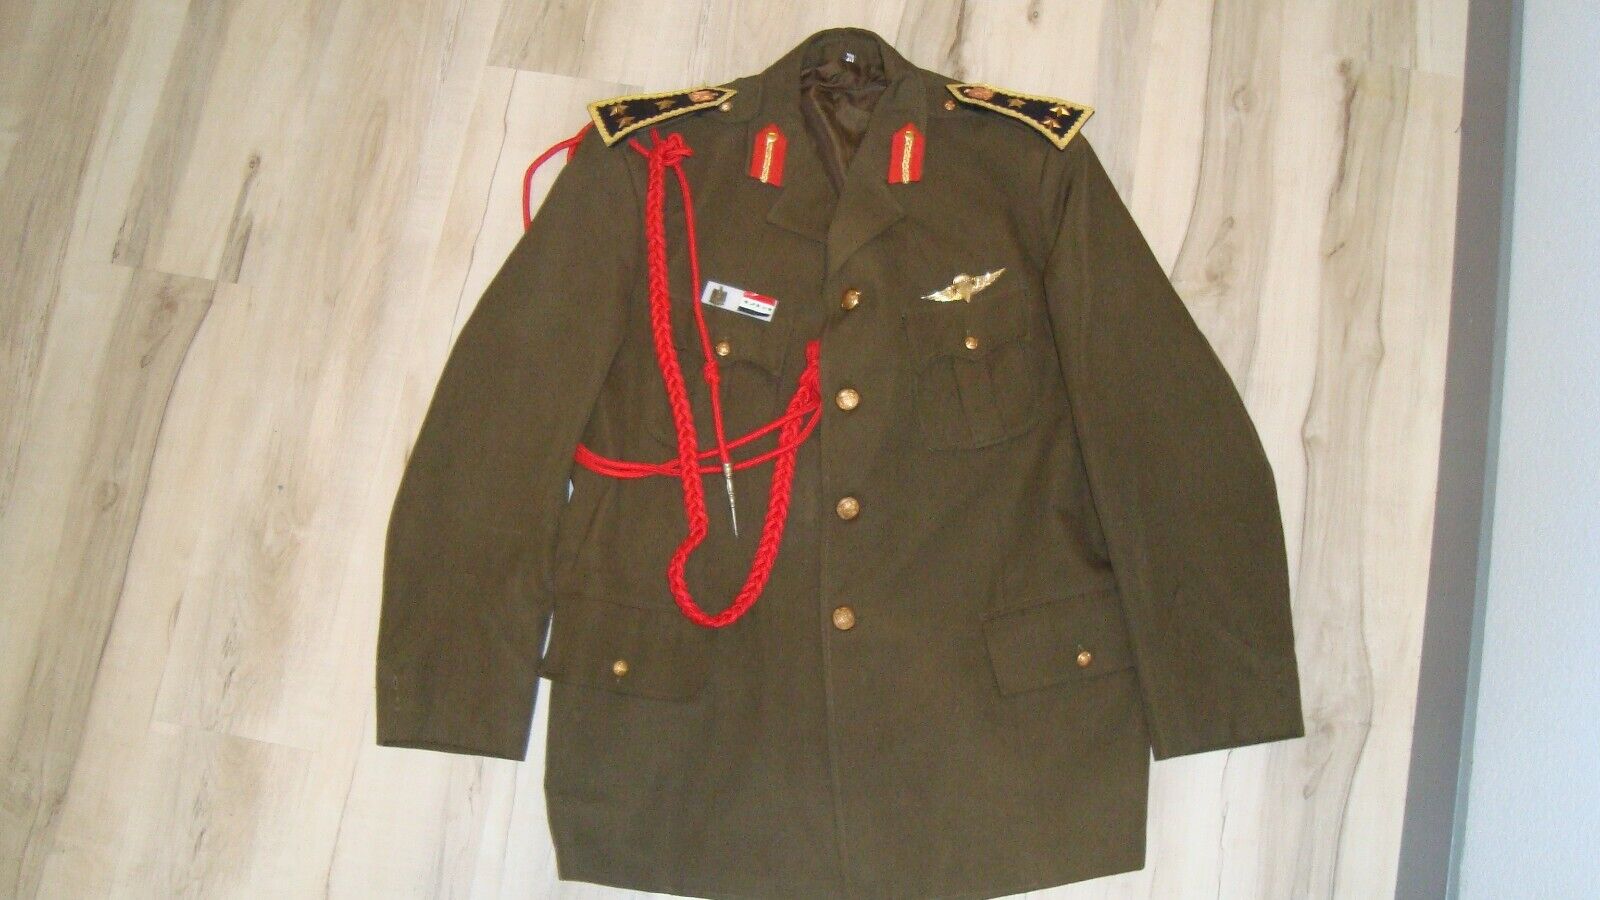 IRAQI OFFICER'S DRESS GENERAL'S UNIFORM-JACKET AND TROUSERS